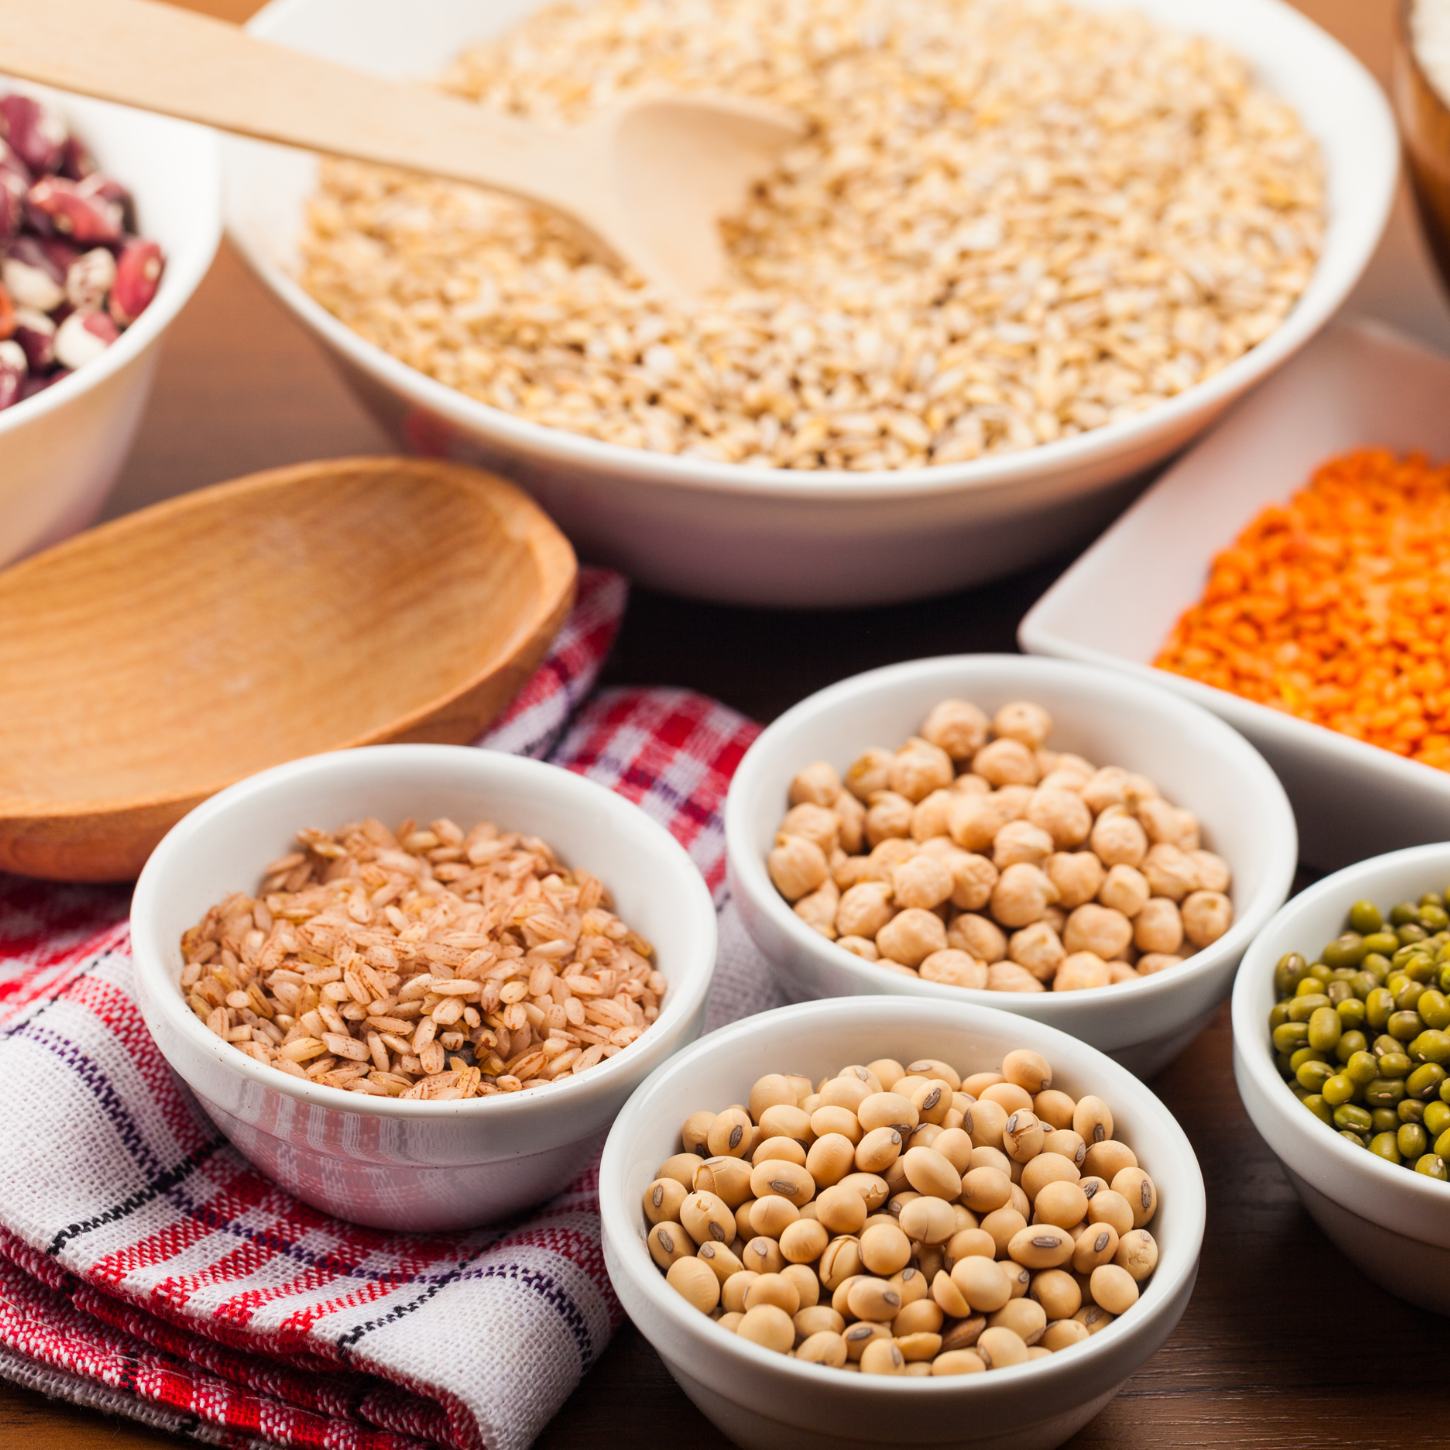 Reflecting on Lectins: Are Lectins Really the Bad Guys?